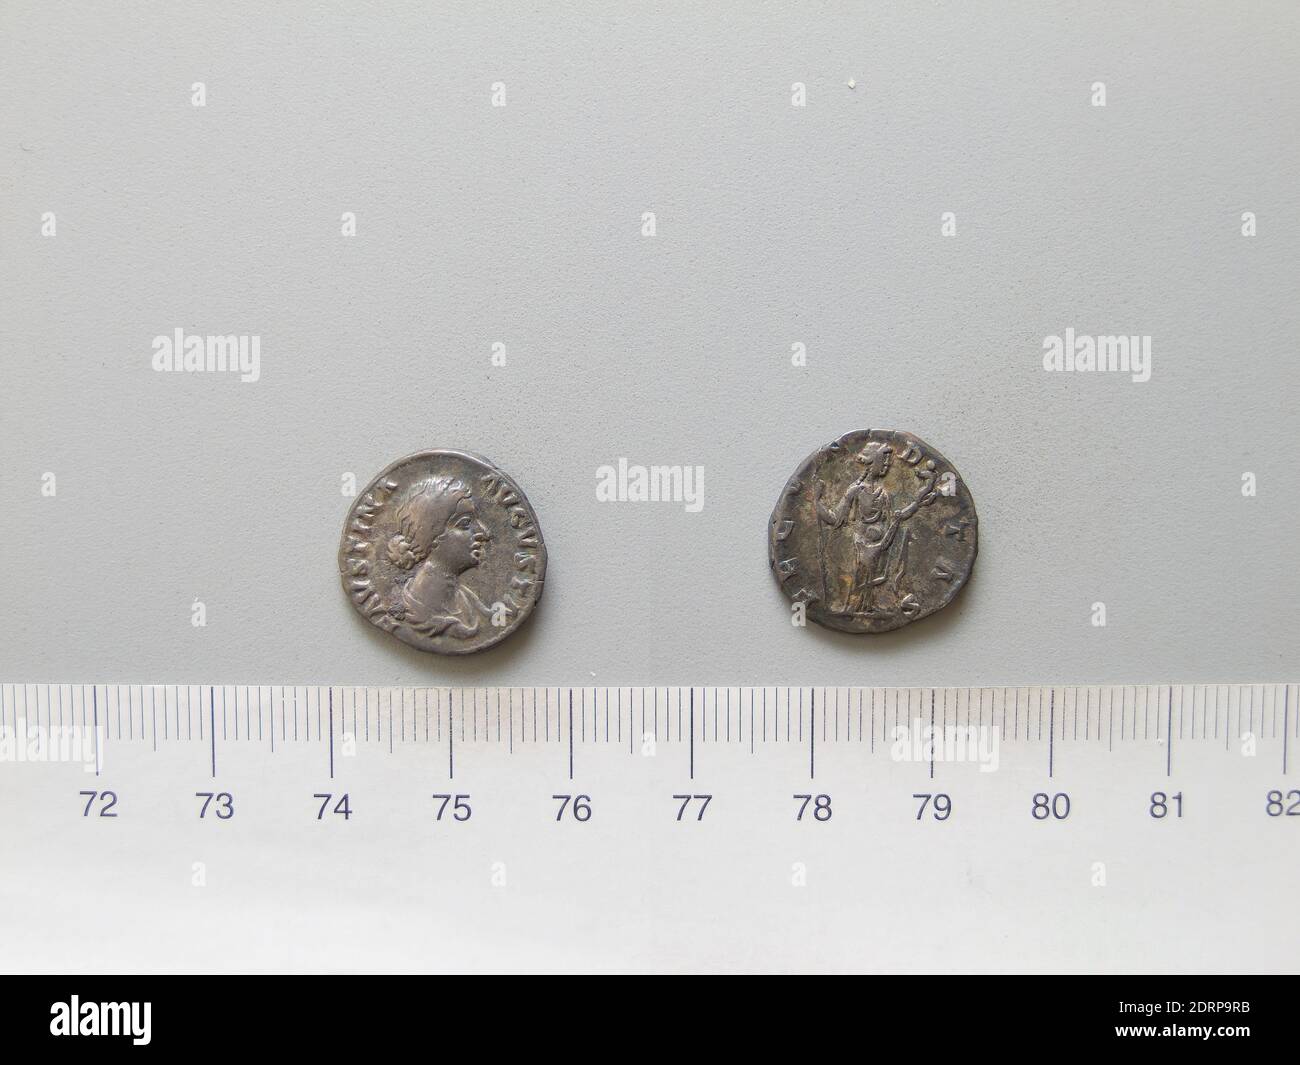 Ruler: Marcus Aurelius, Emperor of Rome, A.D. 121–180, ruled  A.D. 161–80, Mint: Rome, Honorand: Faustina II, Empress consort of Marcus Aurelius, Roman, ca. 125–176, Denarius of Marcus Aurelius, Emperor of Rome from Rome, 161–76, Silver, 2.82 g, 11:00, 17.5 mm, Made in Rome, Italy, Roman, 2nd century, Numismatics Stock Photo